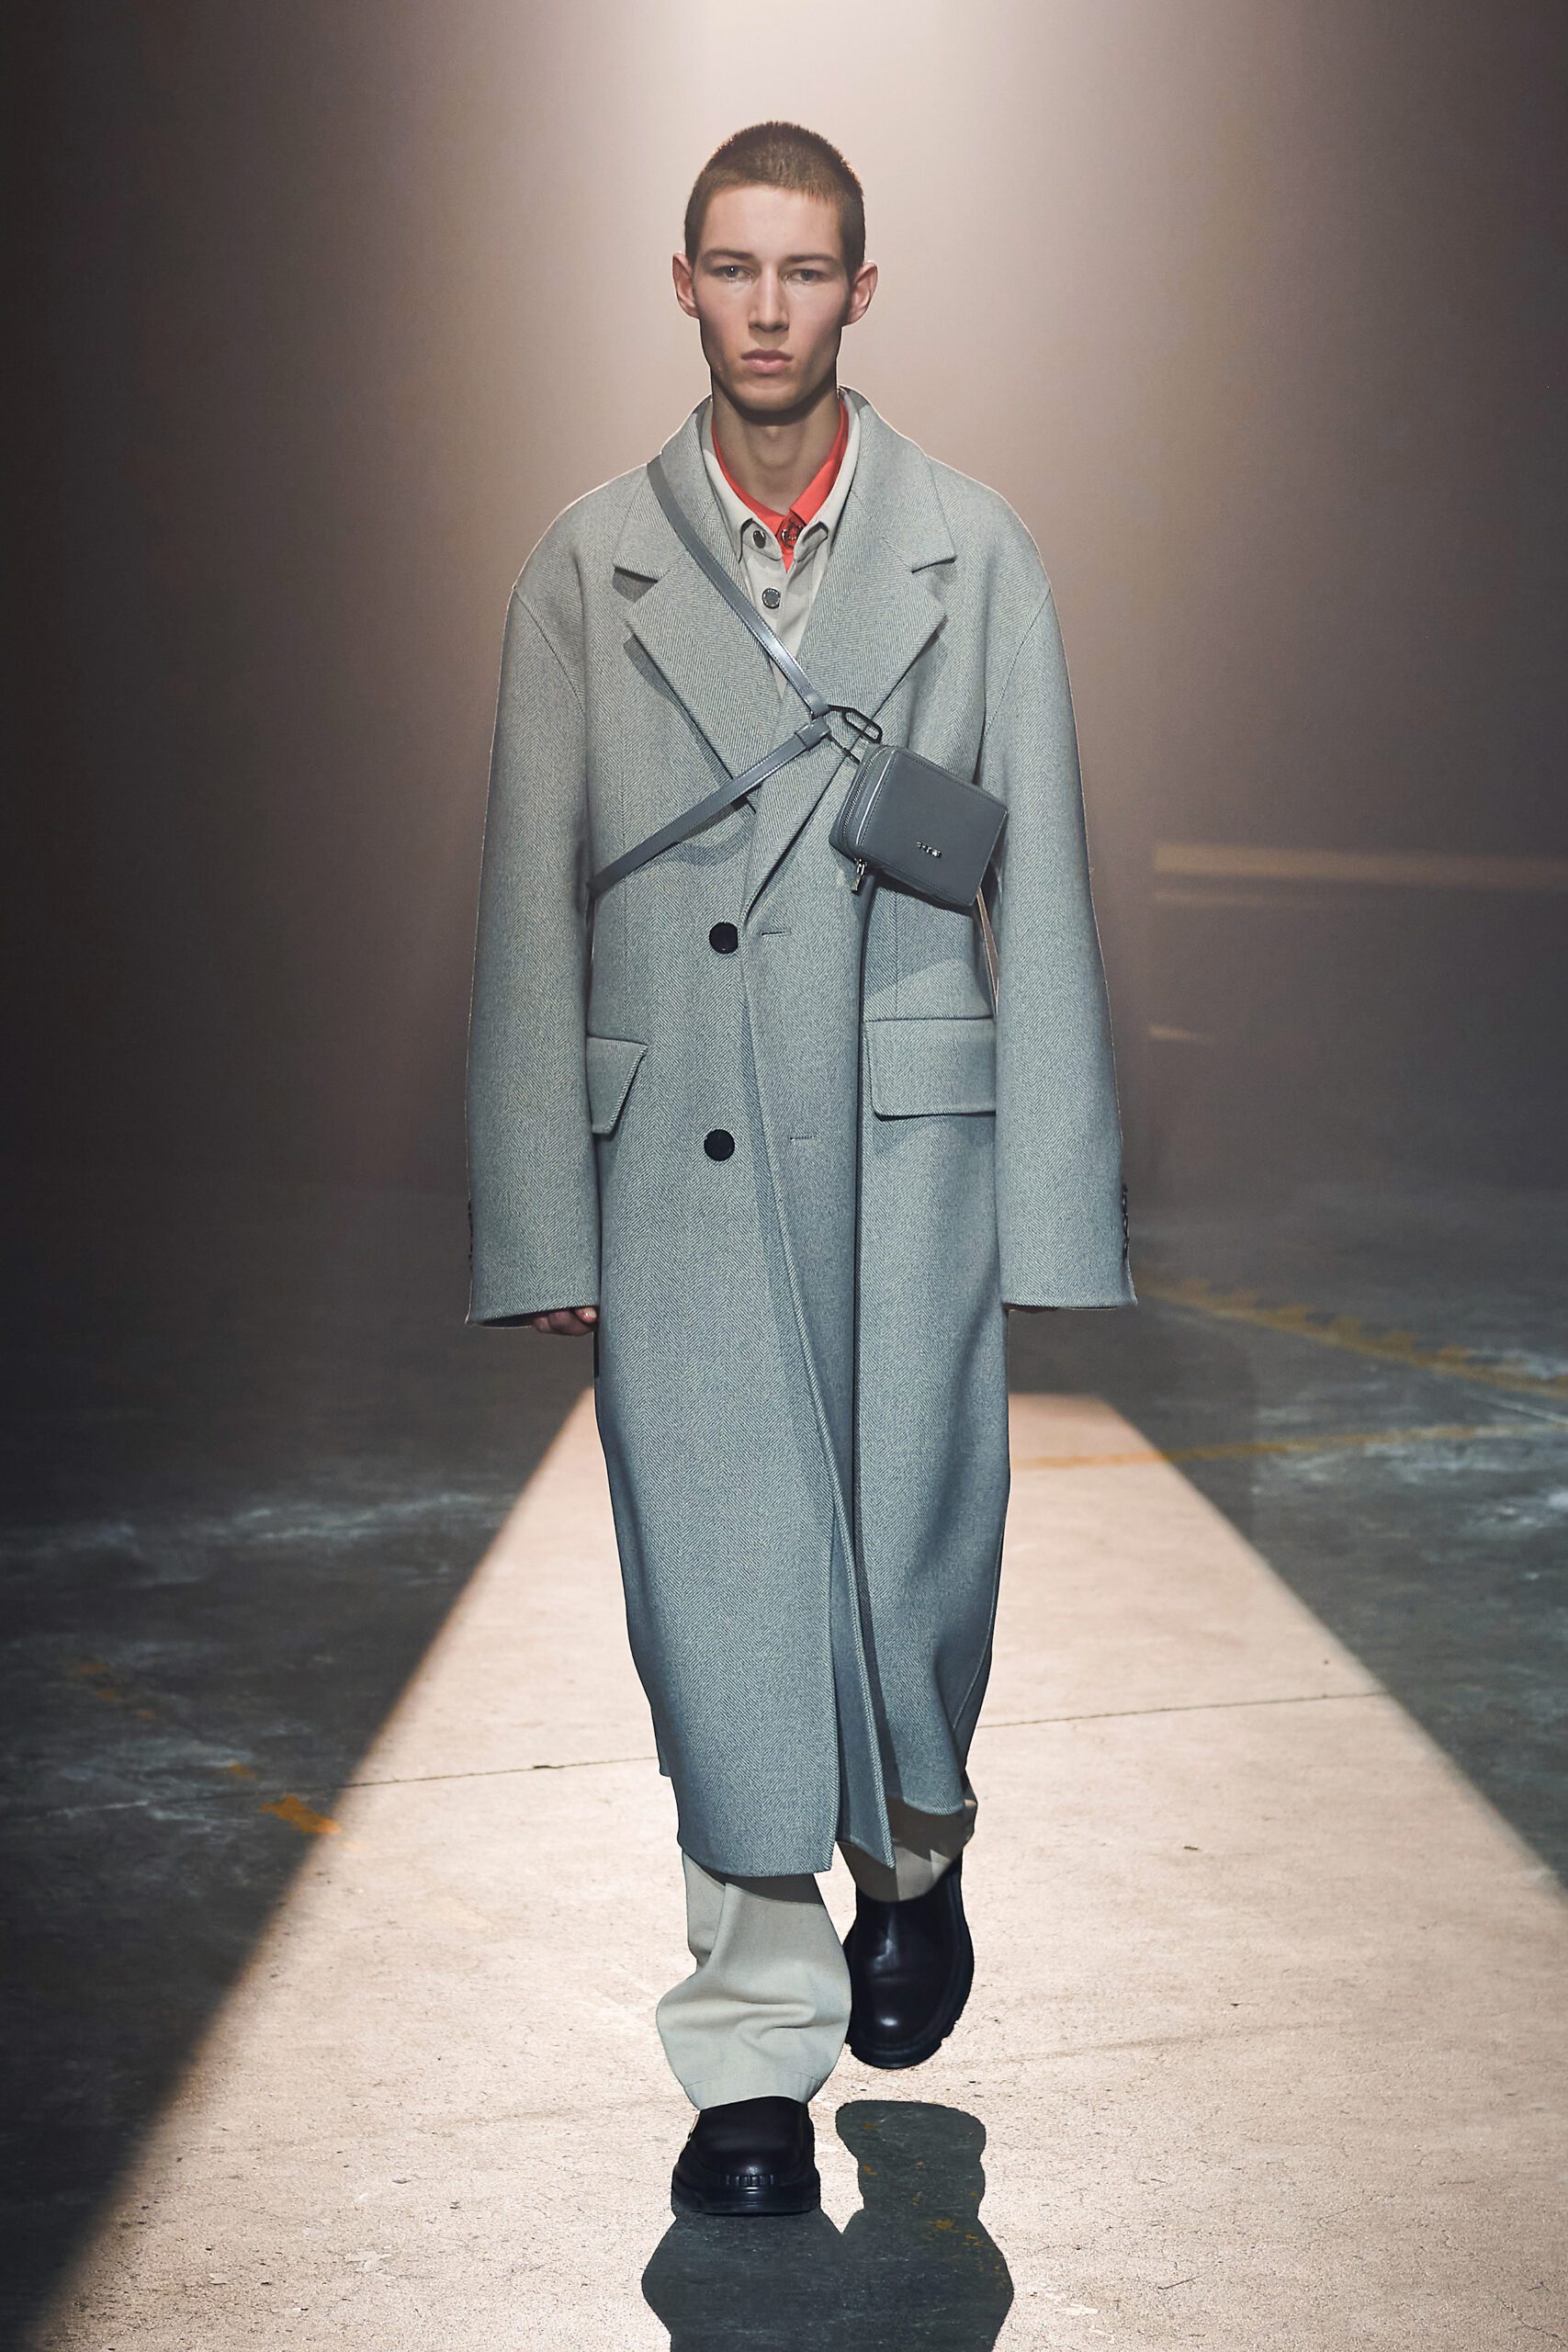 Solid Homme Makes Its First Appearance at Milan Fashion Week - The ...